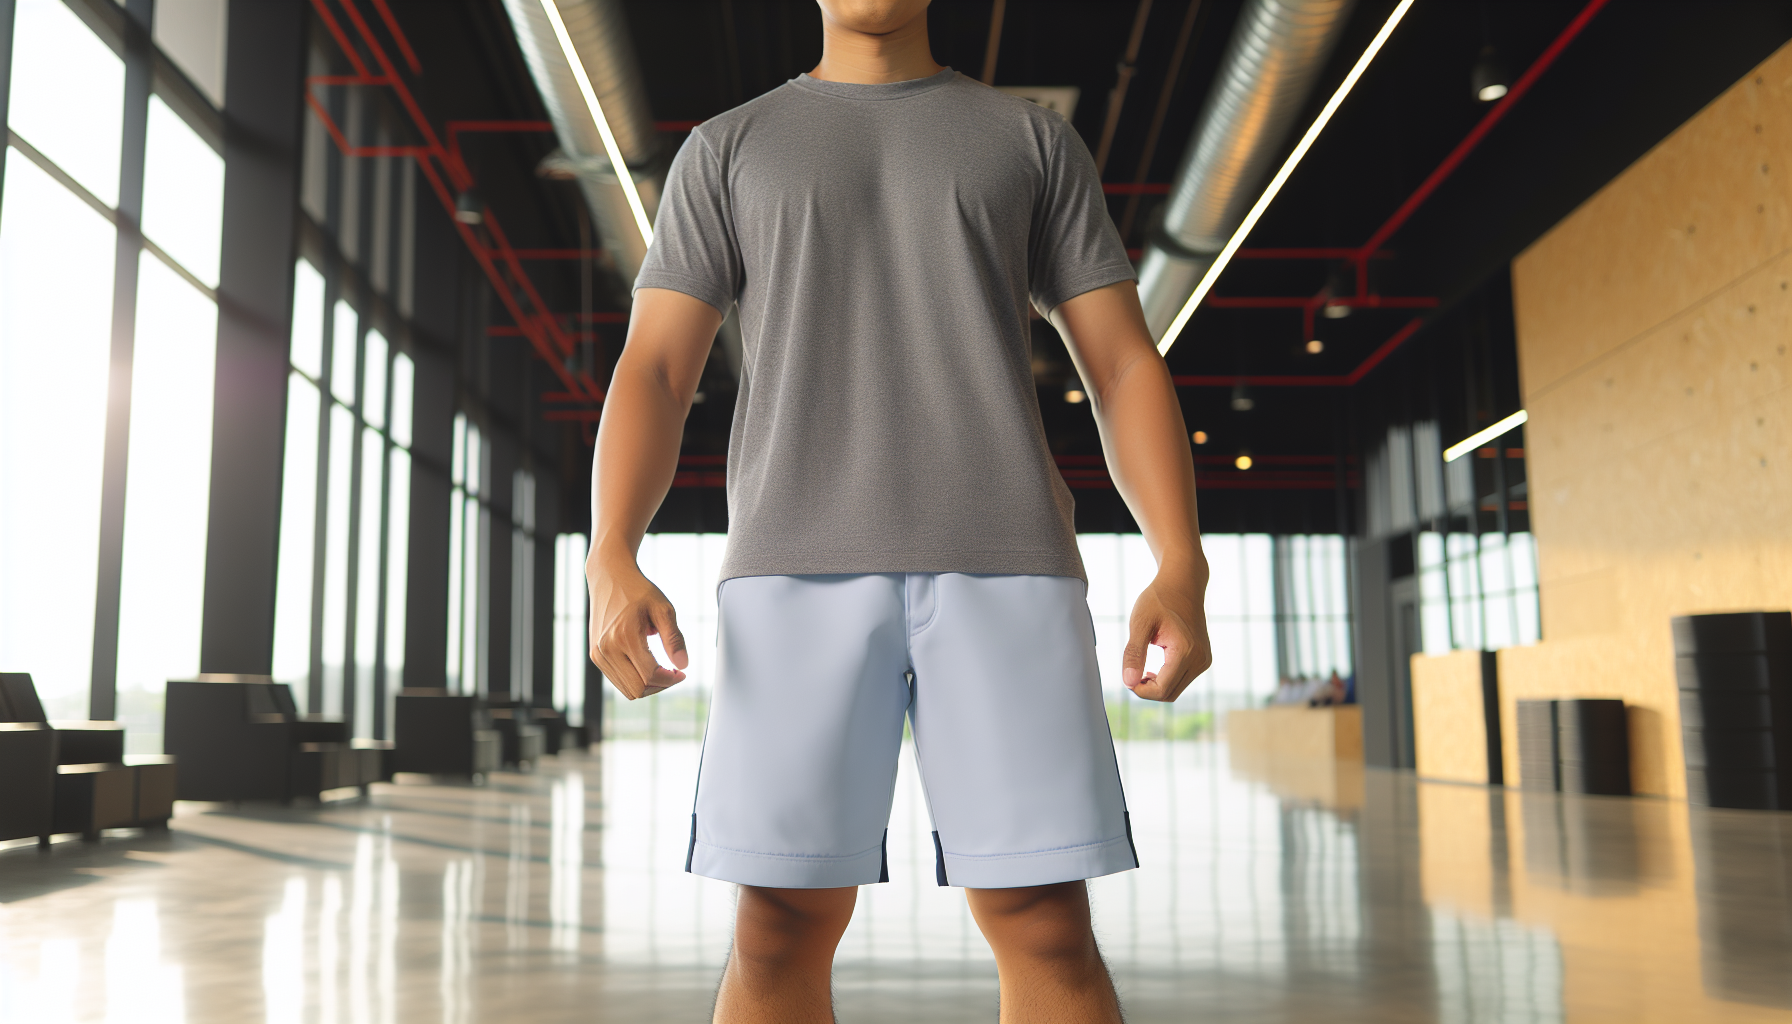 A man wearing gym shorts for a workout